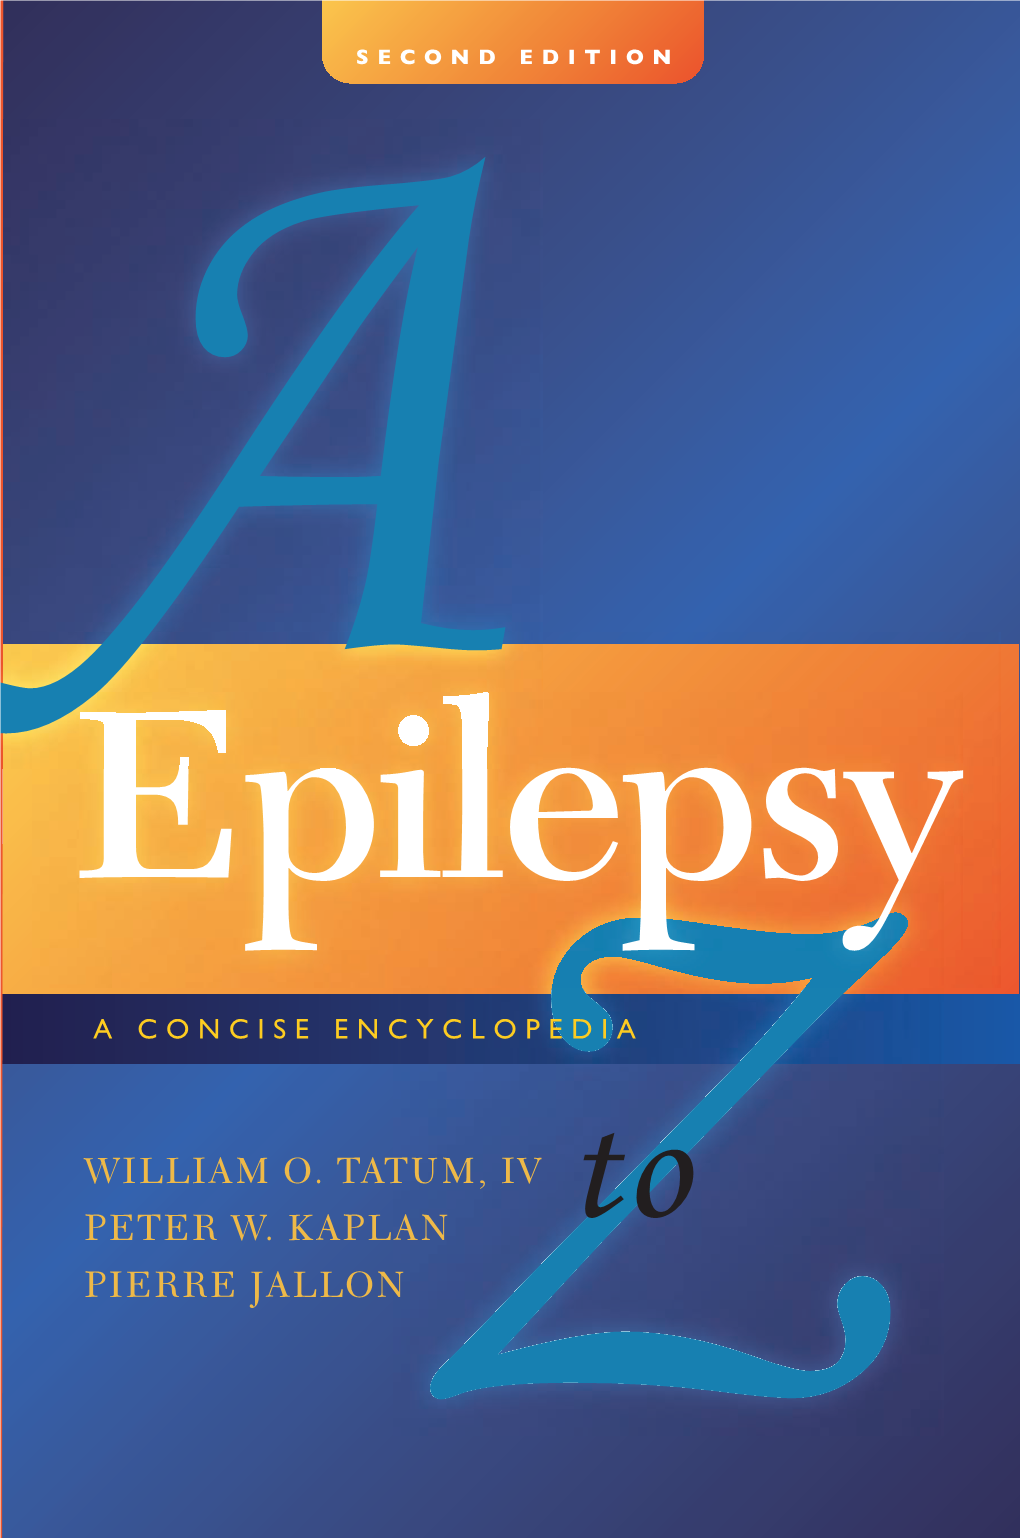 Epilepsy a to Z G a Concise Encyclopedia H I Second Edition J William O